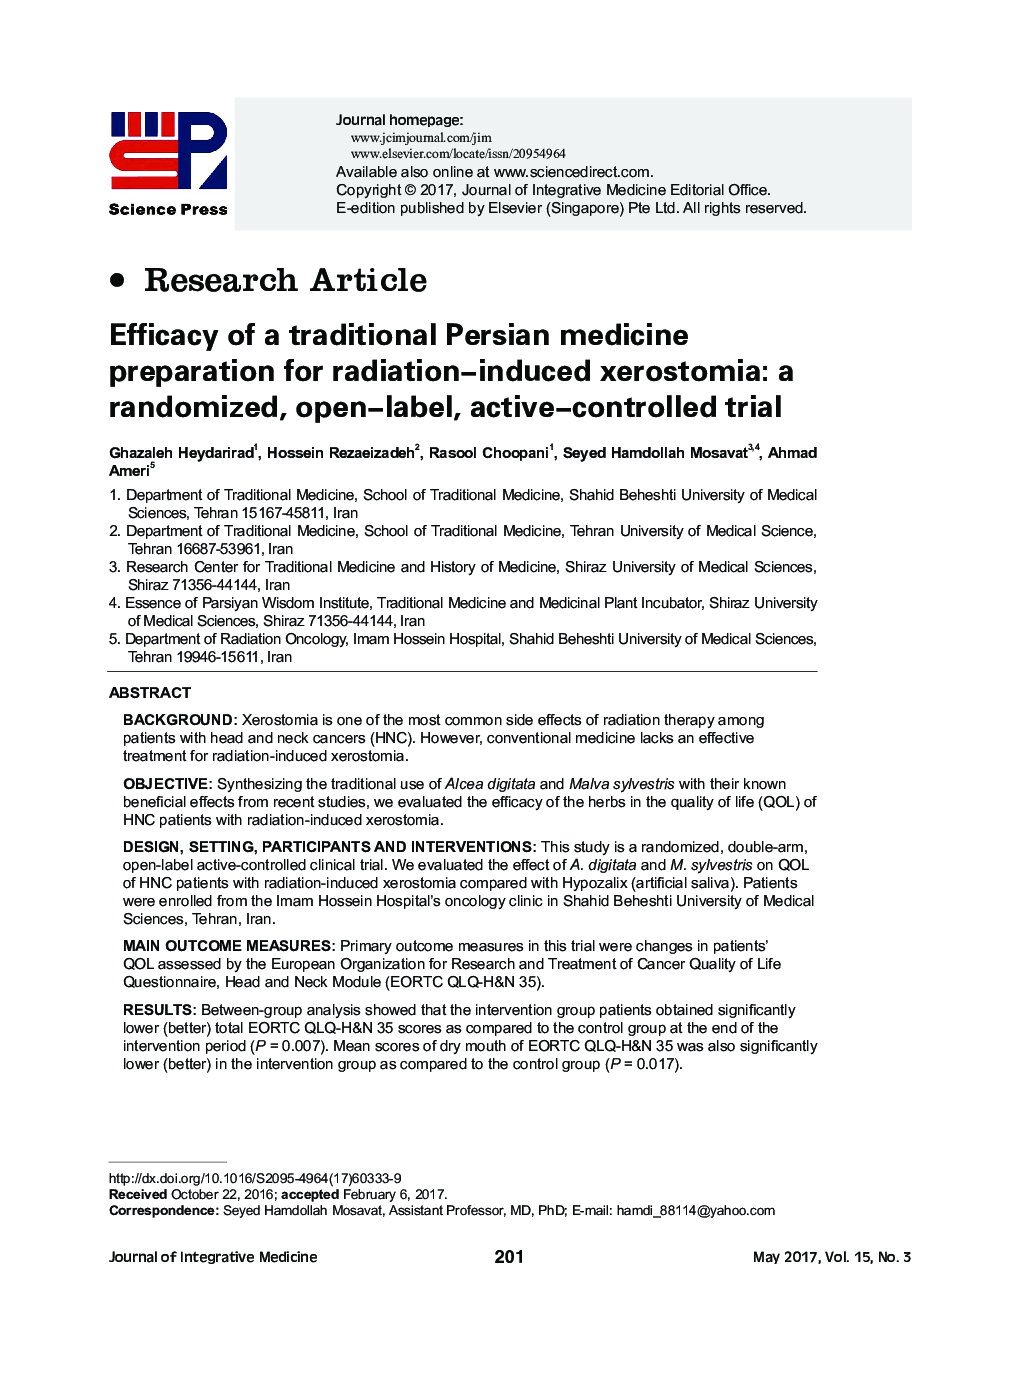 Efficacy of a traditional Persian medicine preparation for radiation-induced xerostomia: a randomized, open-label, active-controlled trial